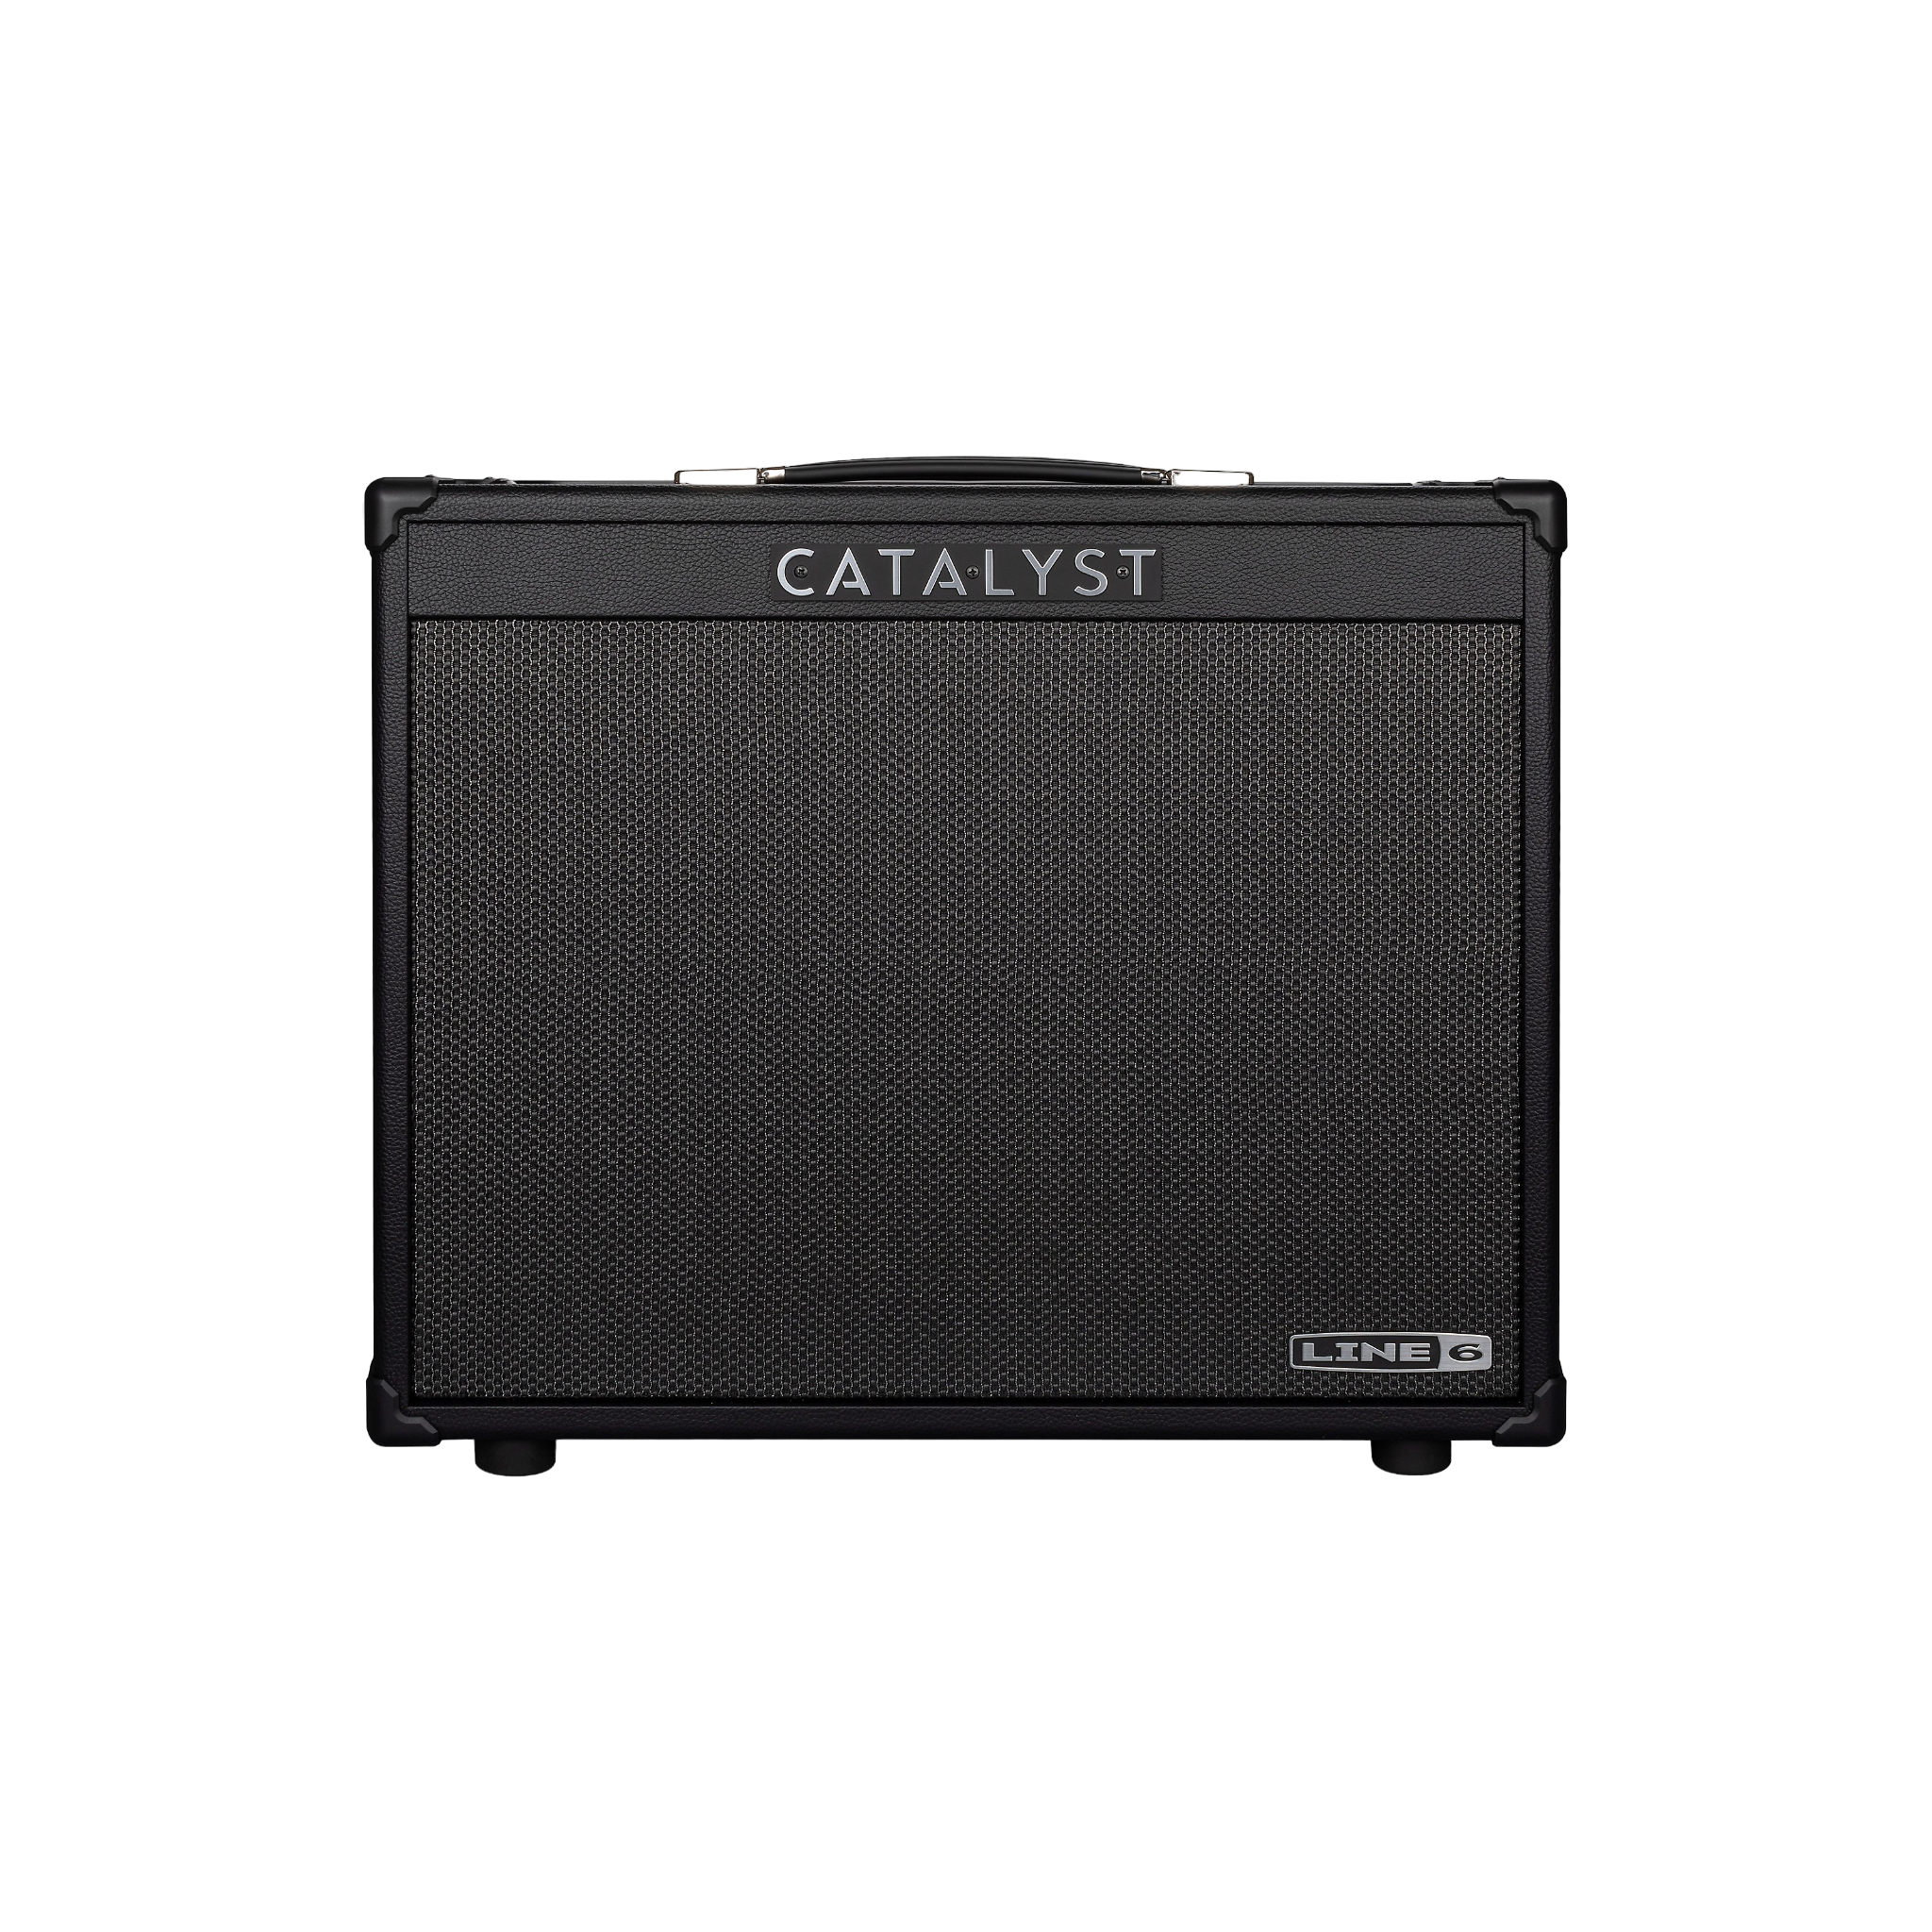 Line 6 Catalyst 100 100w dual channel guitar amp with 6 original amp designs using HX technology